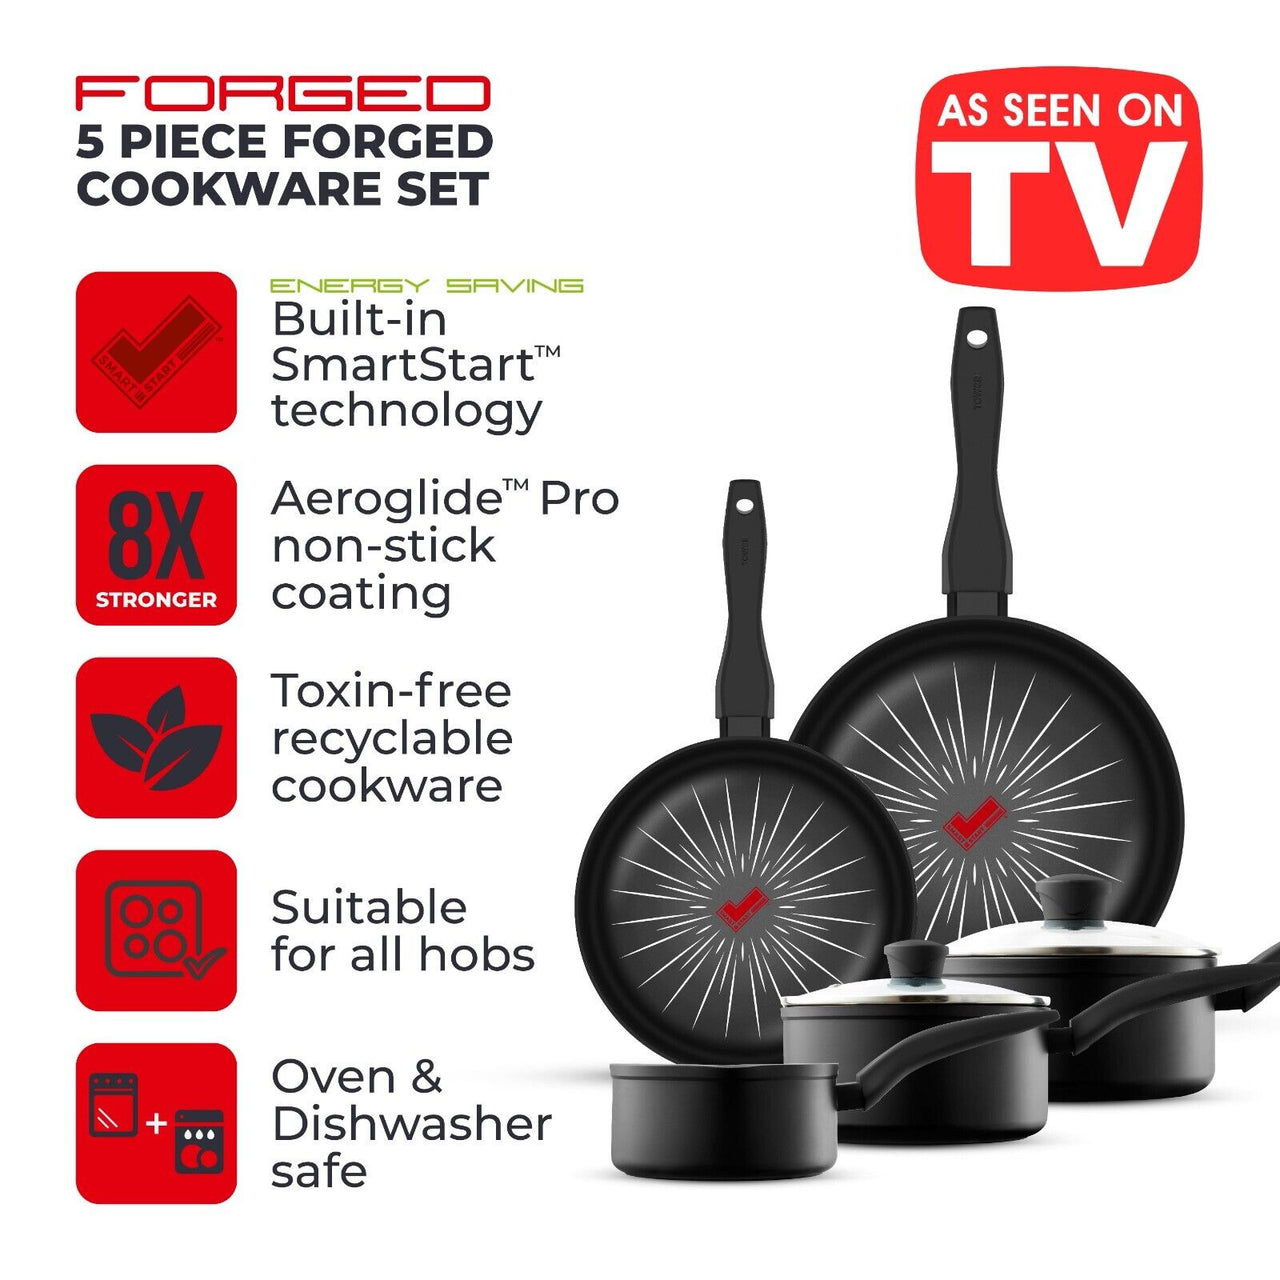 Tower Smart Start 5 Piece Forged Cookware Set T800304 - 5 Year Guarantee